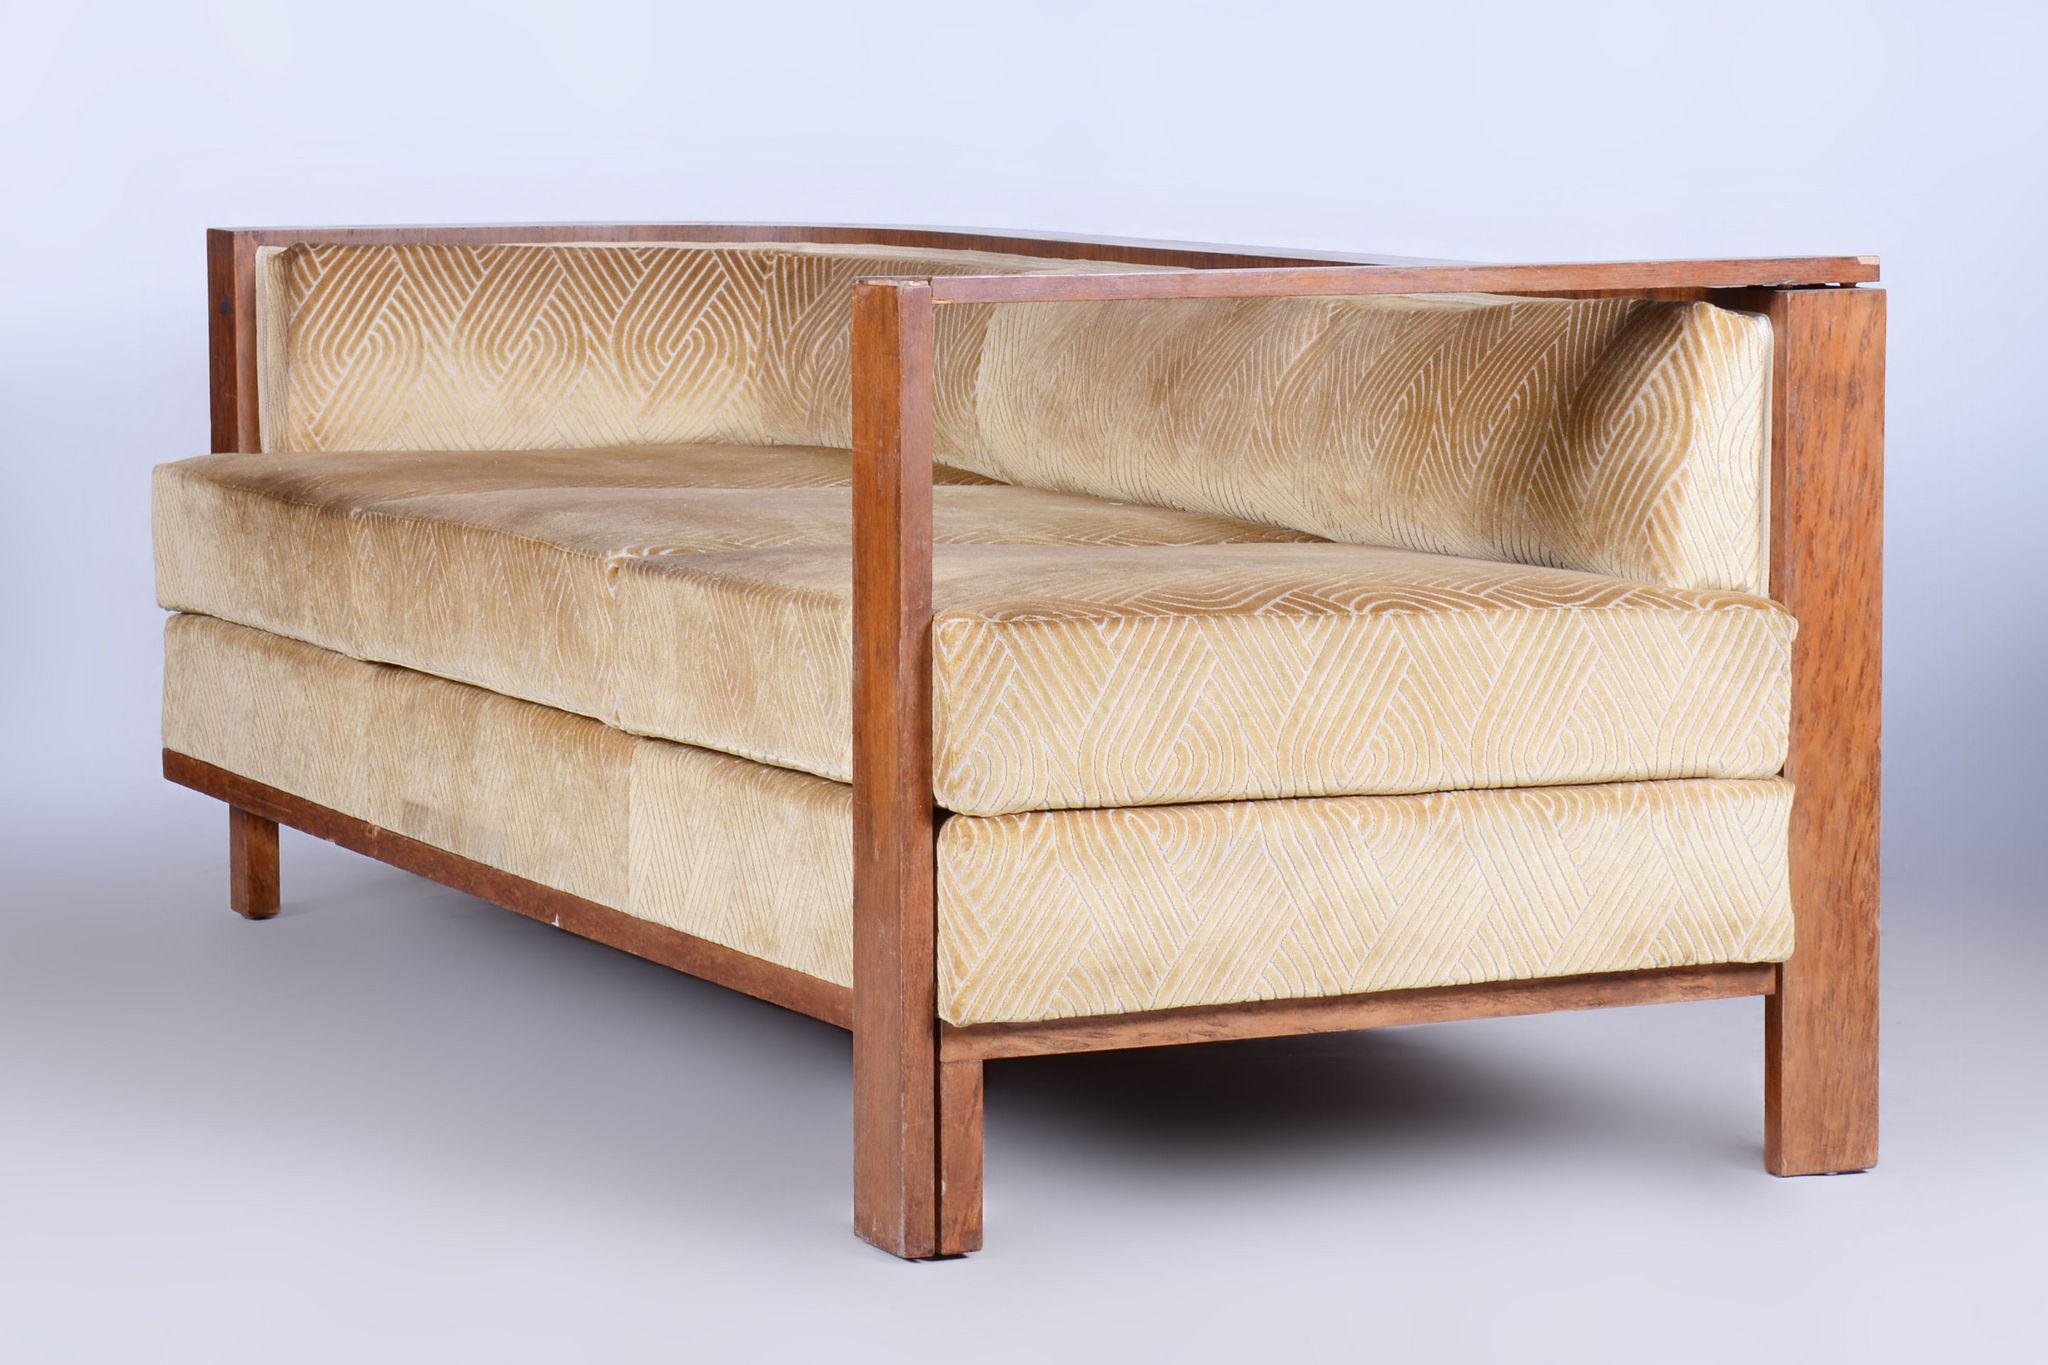 Palisander Seating Set with Coffee Table, Art Deco, Restored, France, 1920s For Sale 11